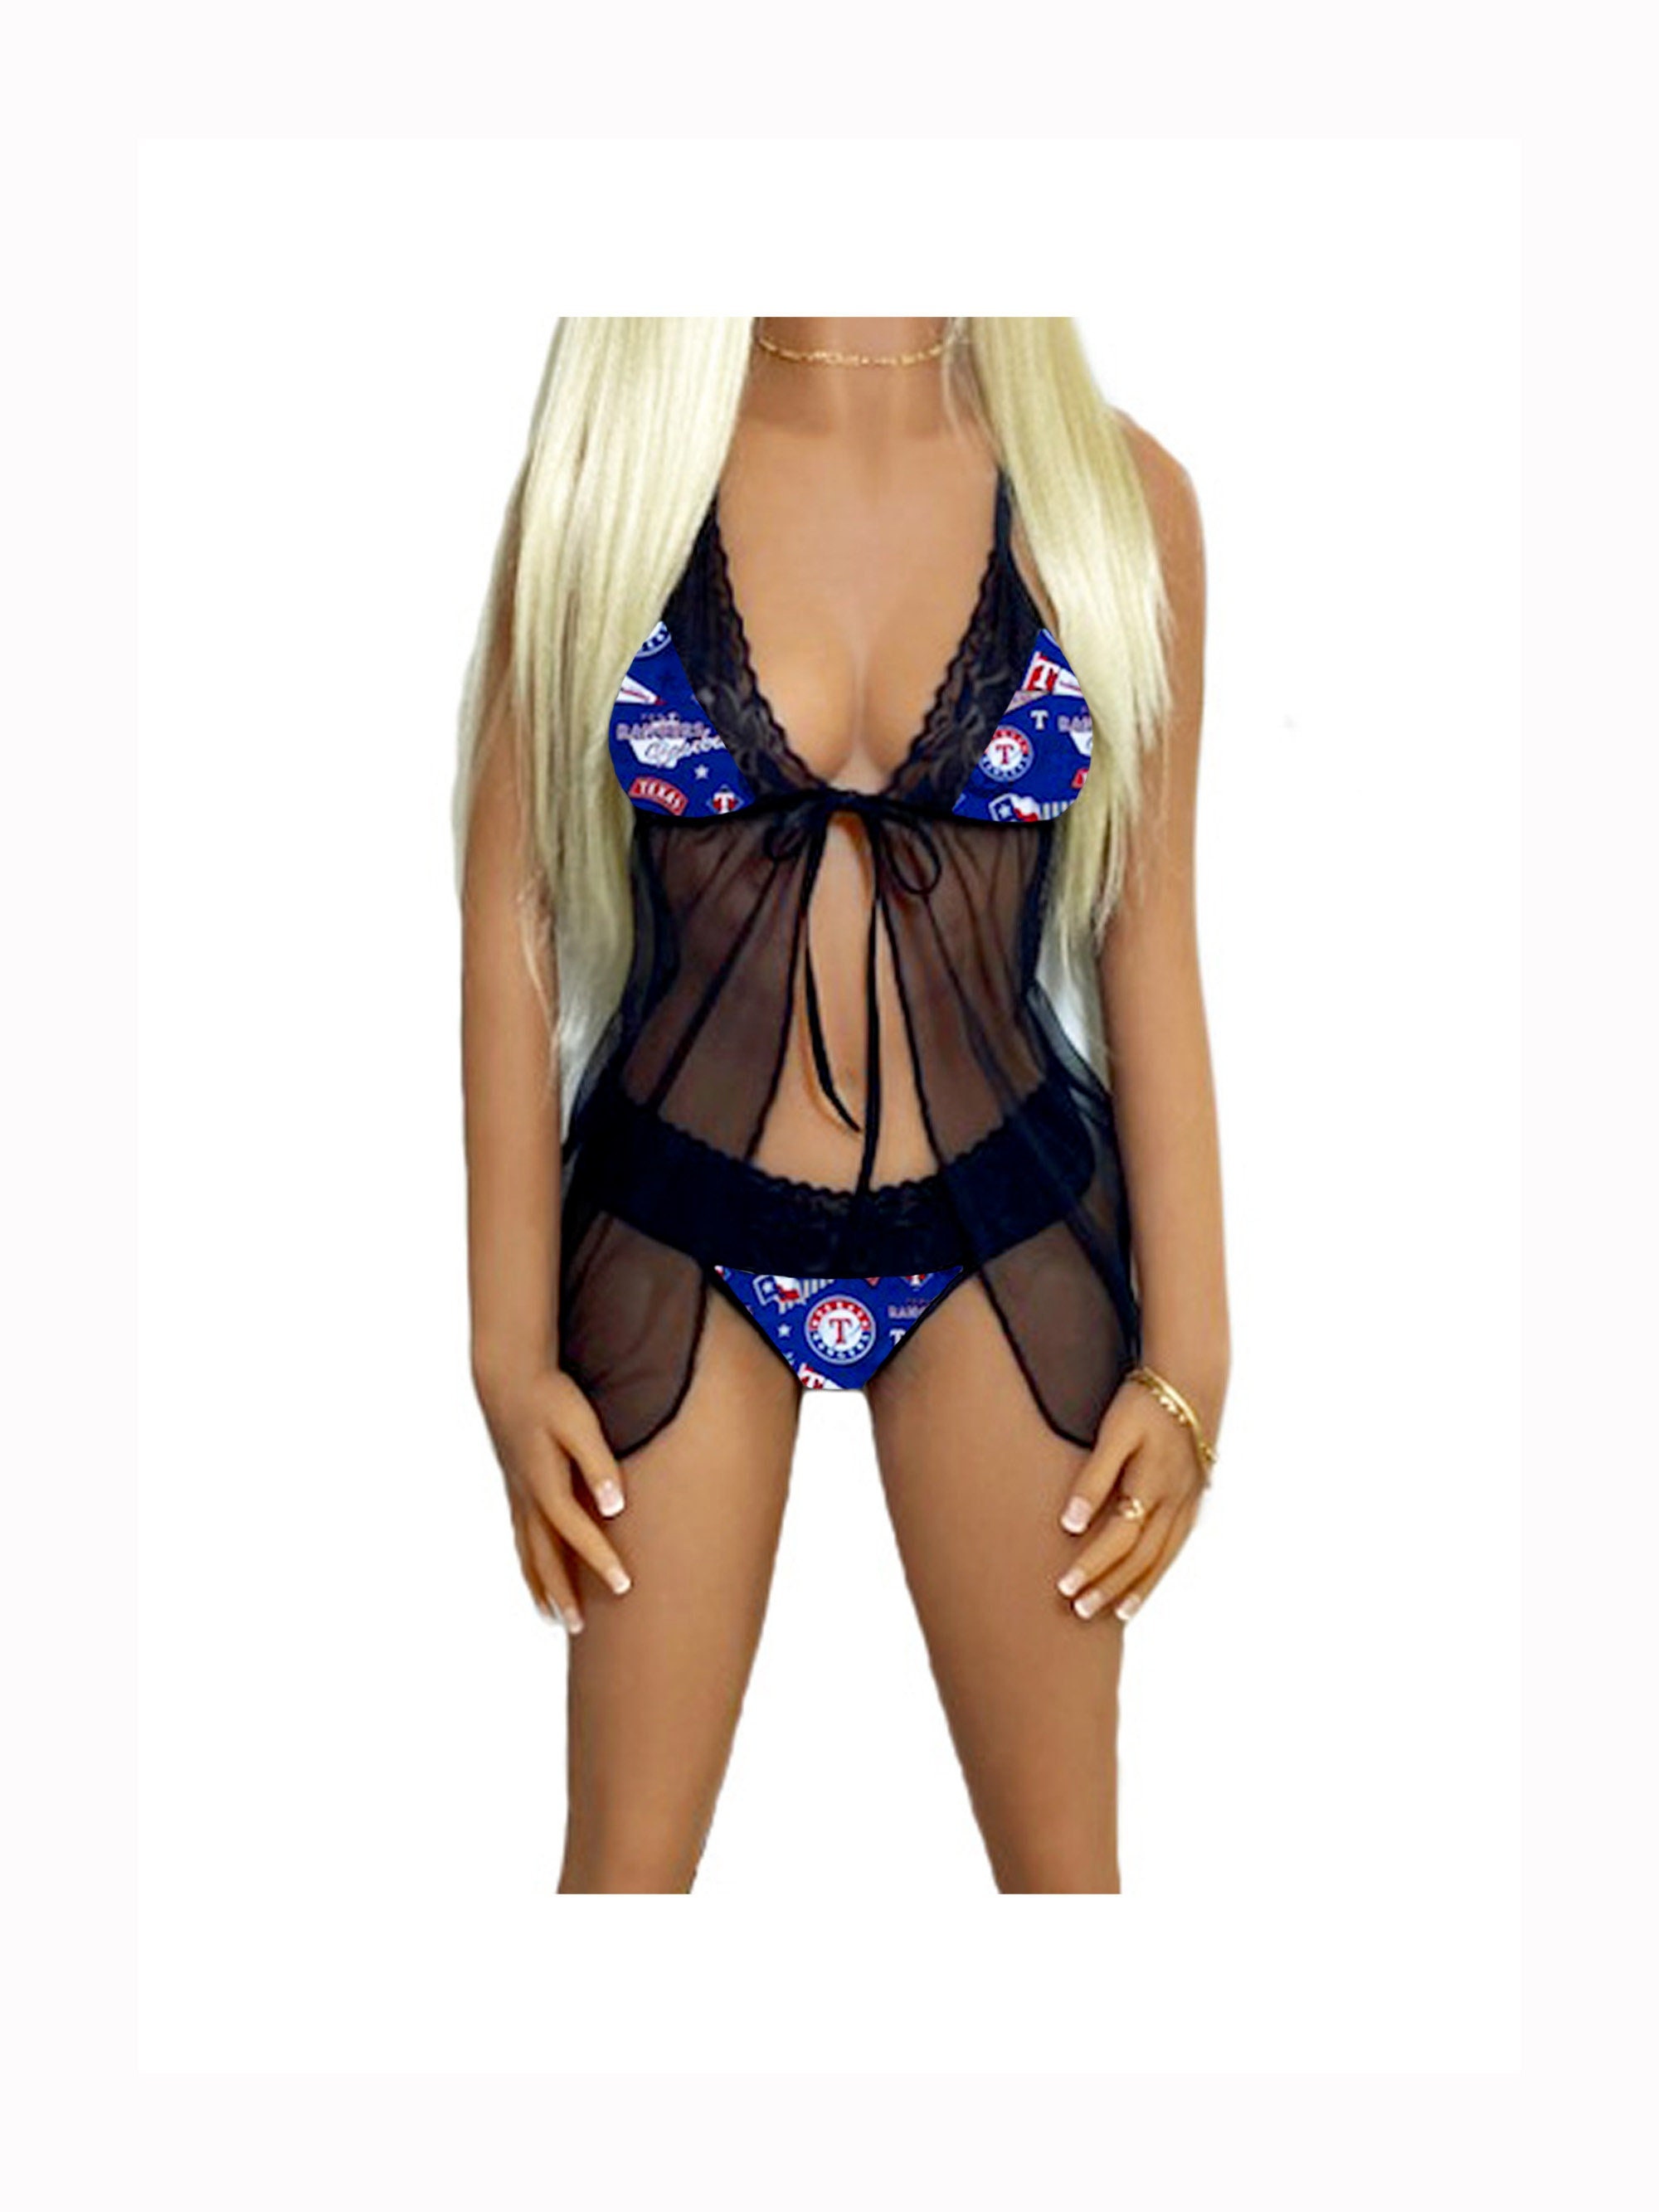 NHL New York Rangers Sexy Lingerie Lace Lingerie White Baby Doll